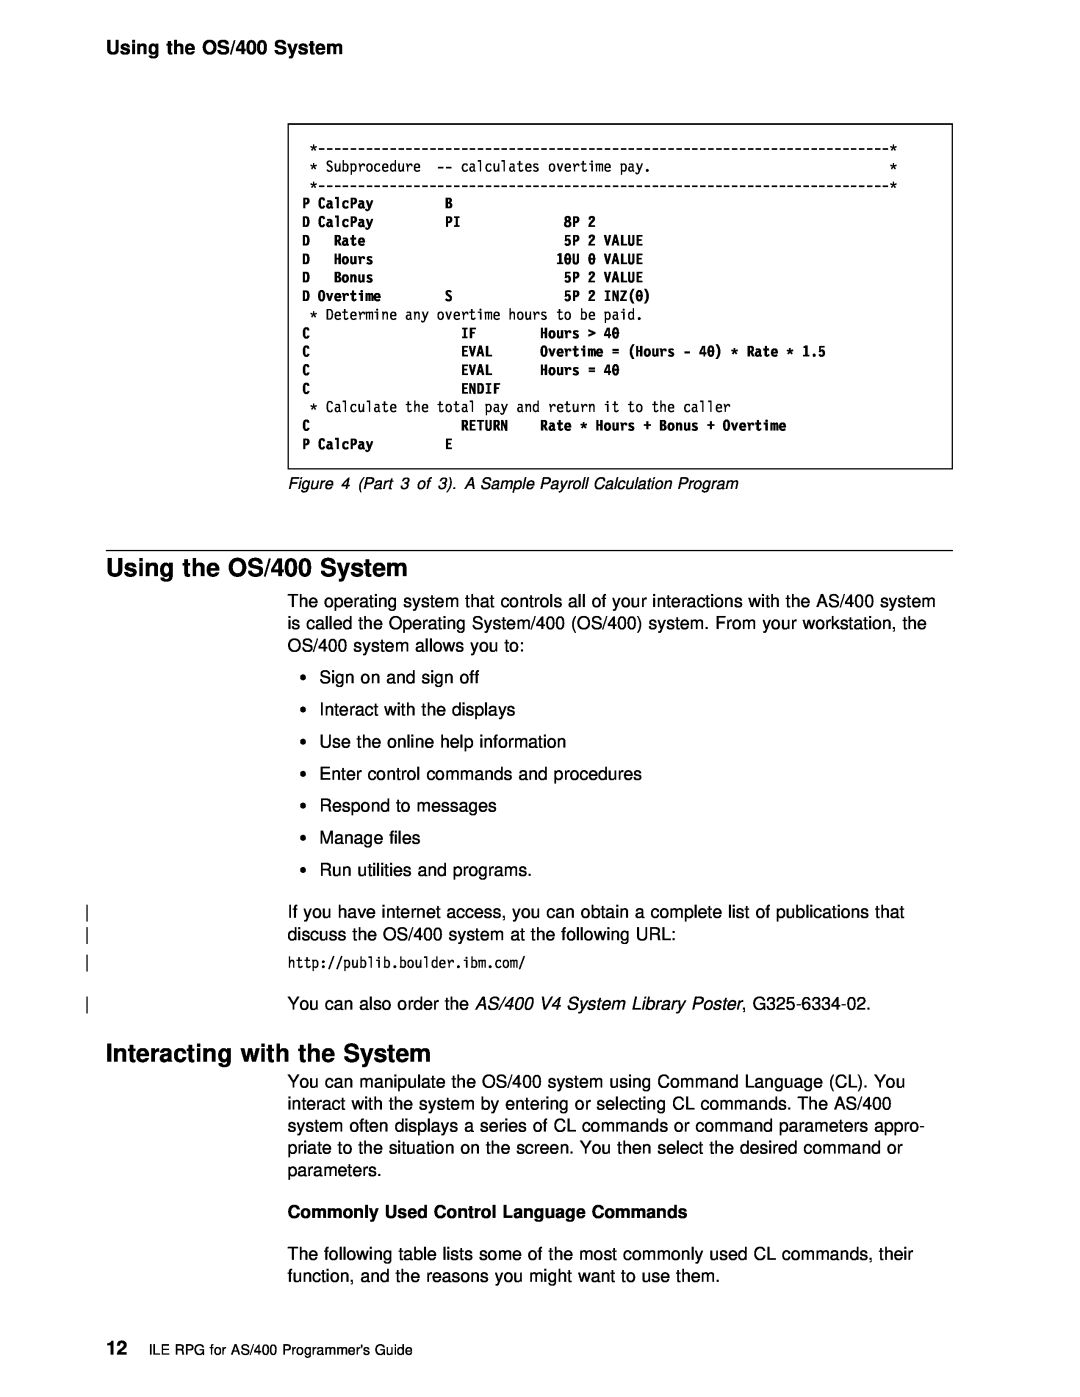 IBM AS/400 manual Interacting with the System, OS/400 System, Using 